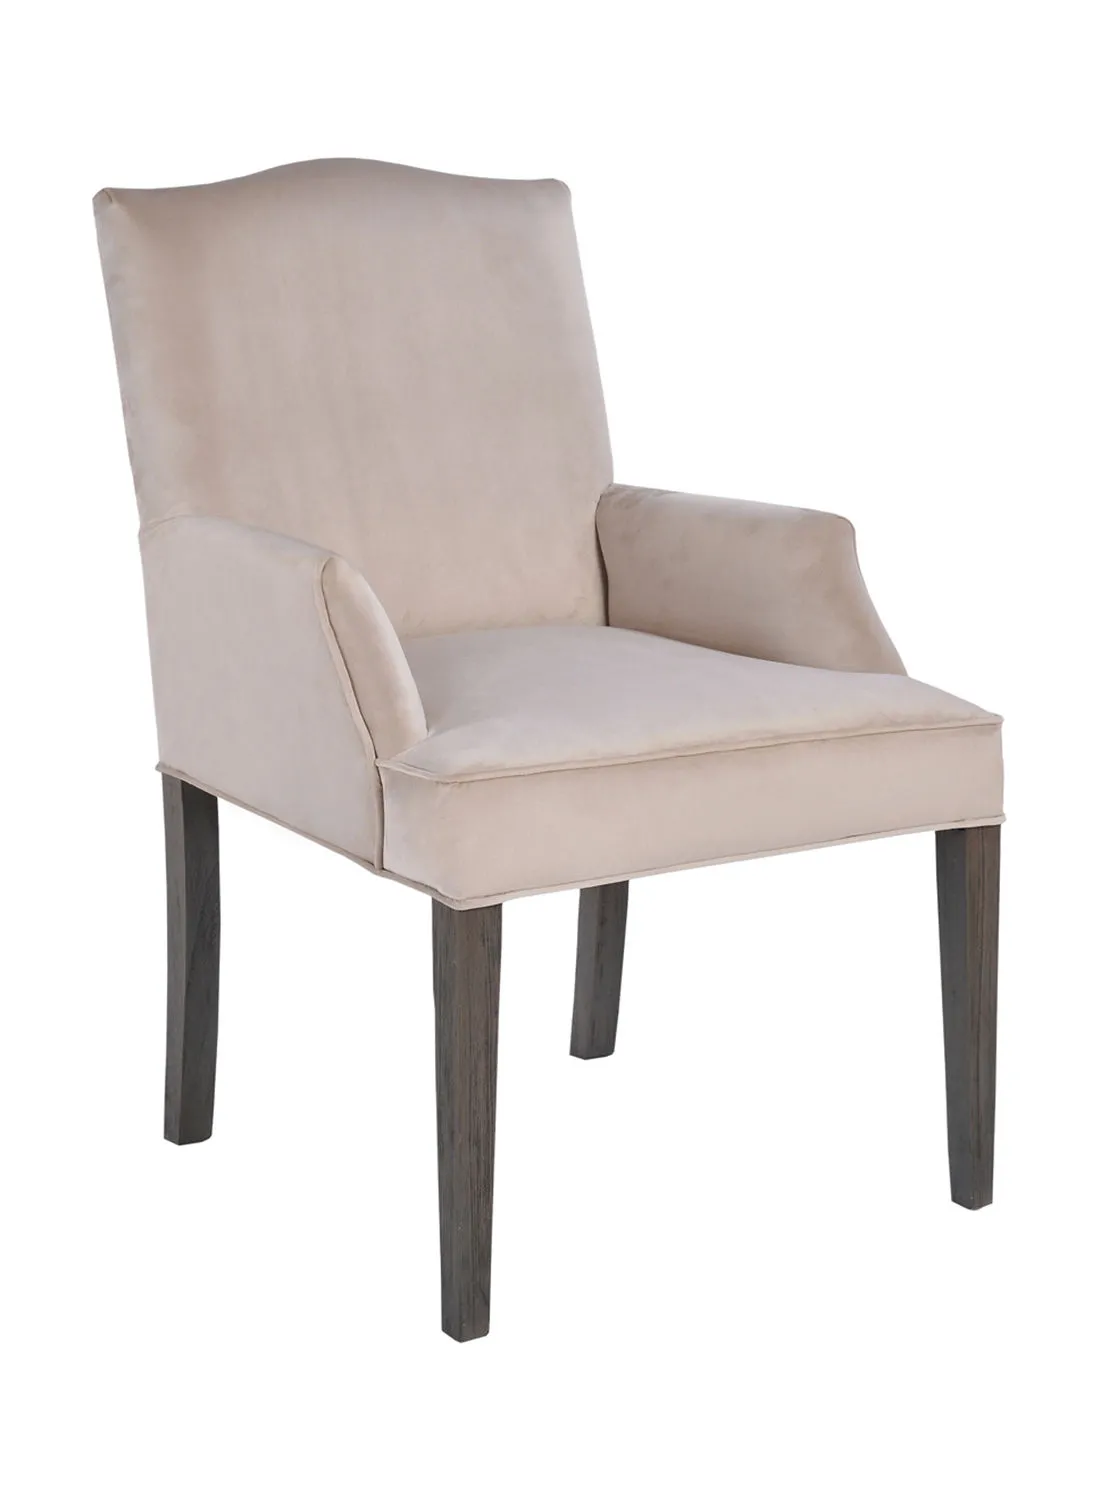 ebb & flow Dining Chair Luxurious - In Oak/Pink Wooden Chair Size 59.5 X 68.5 X 90